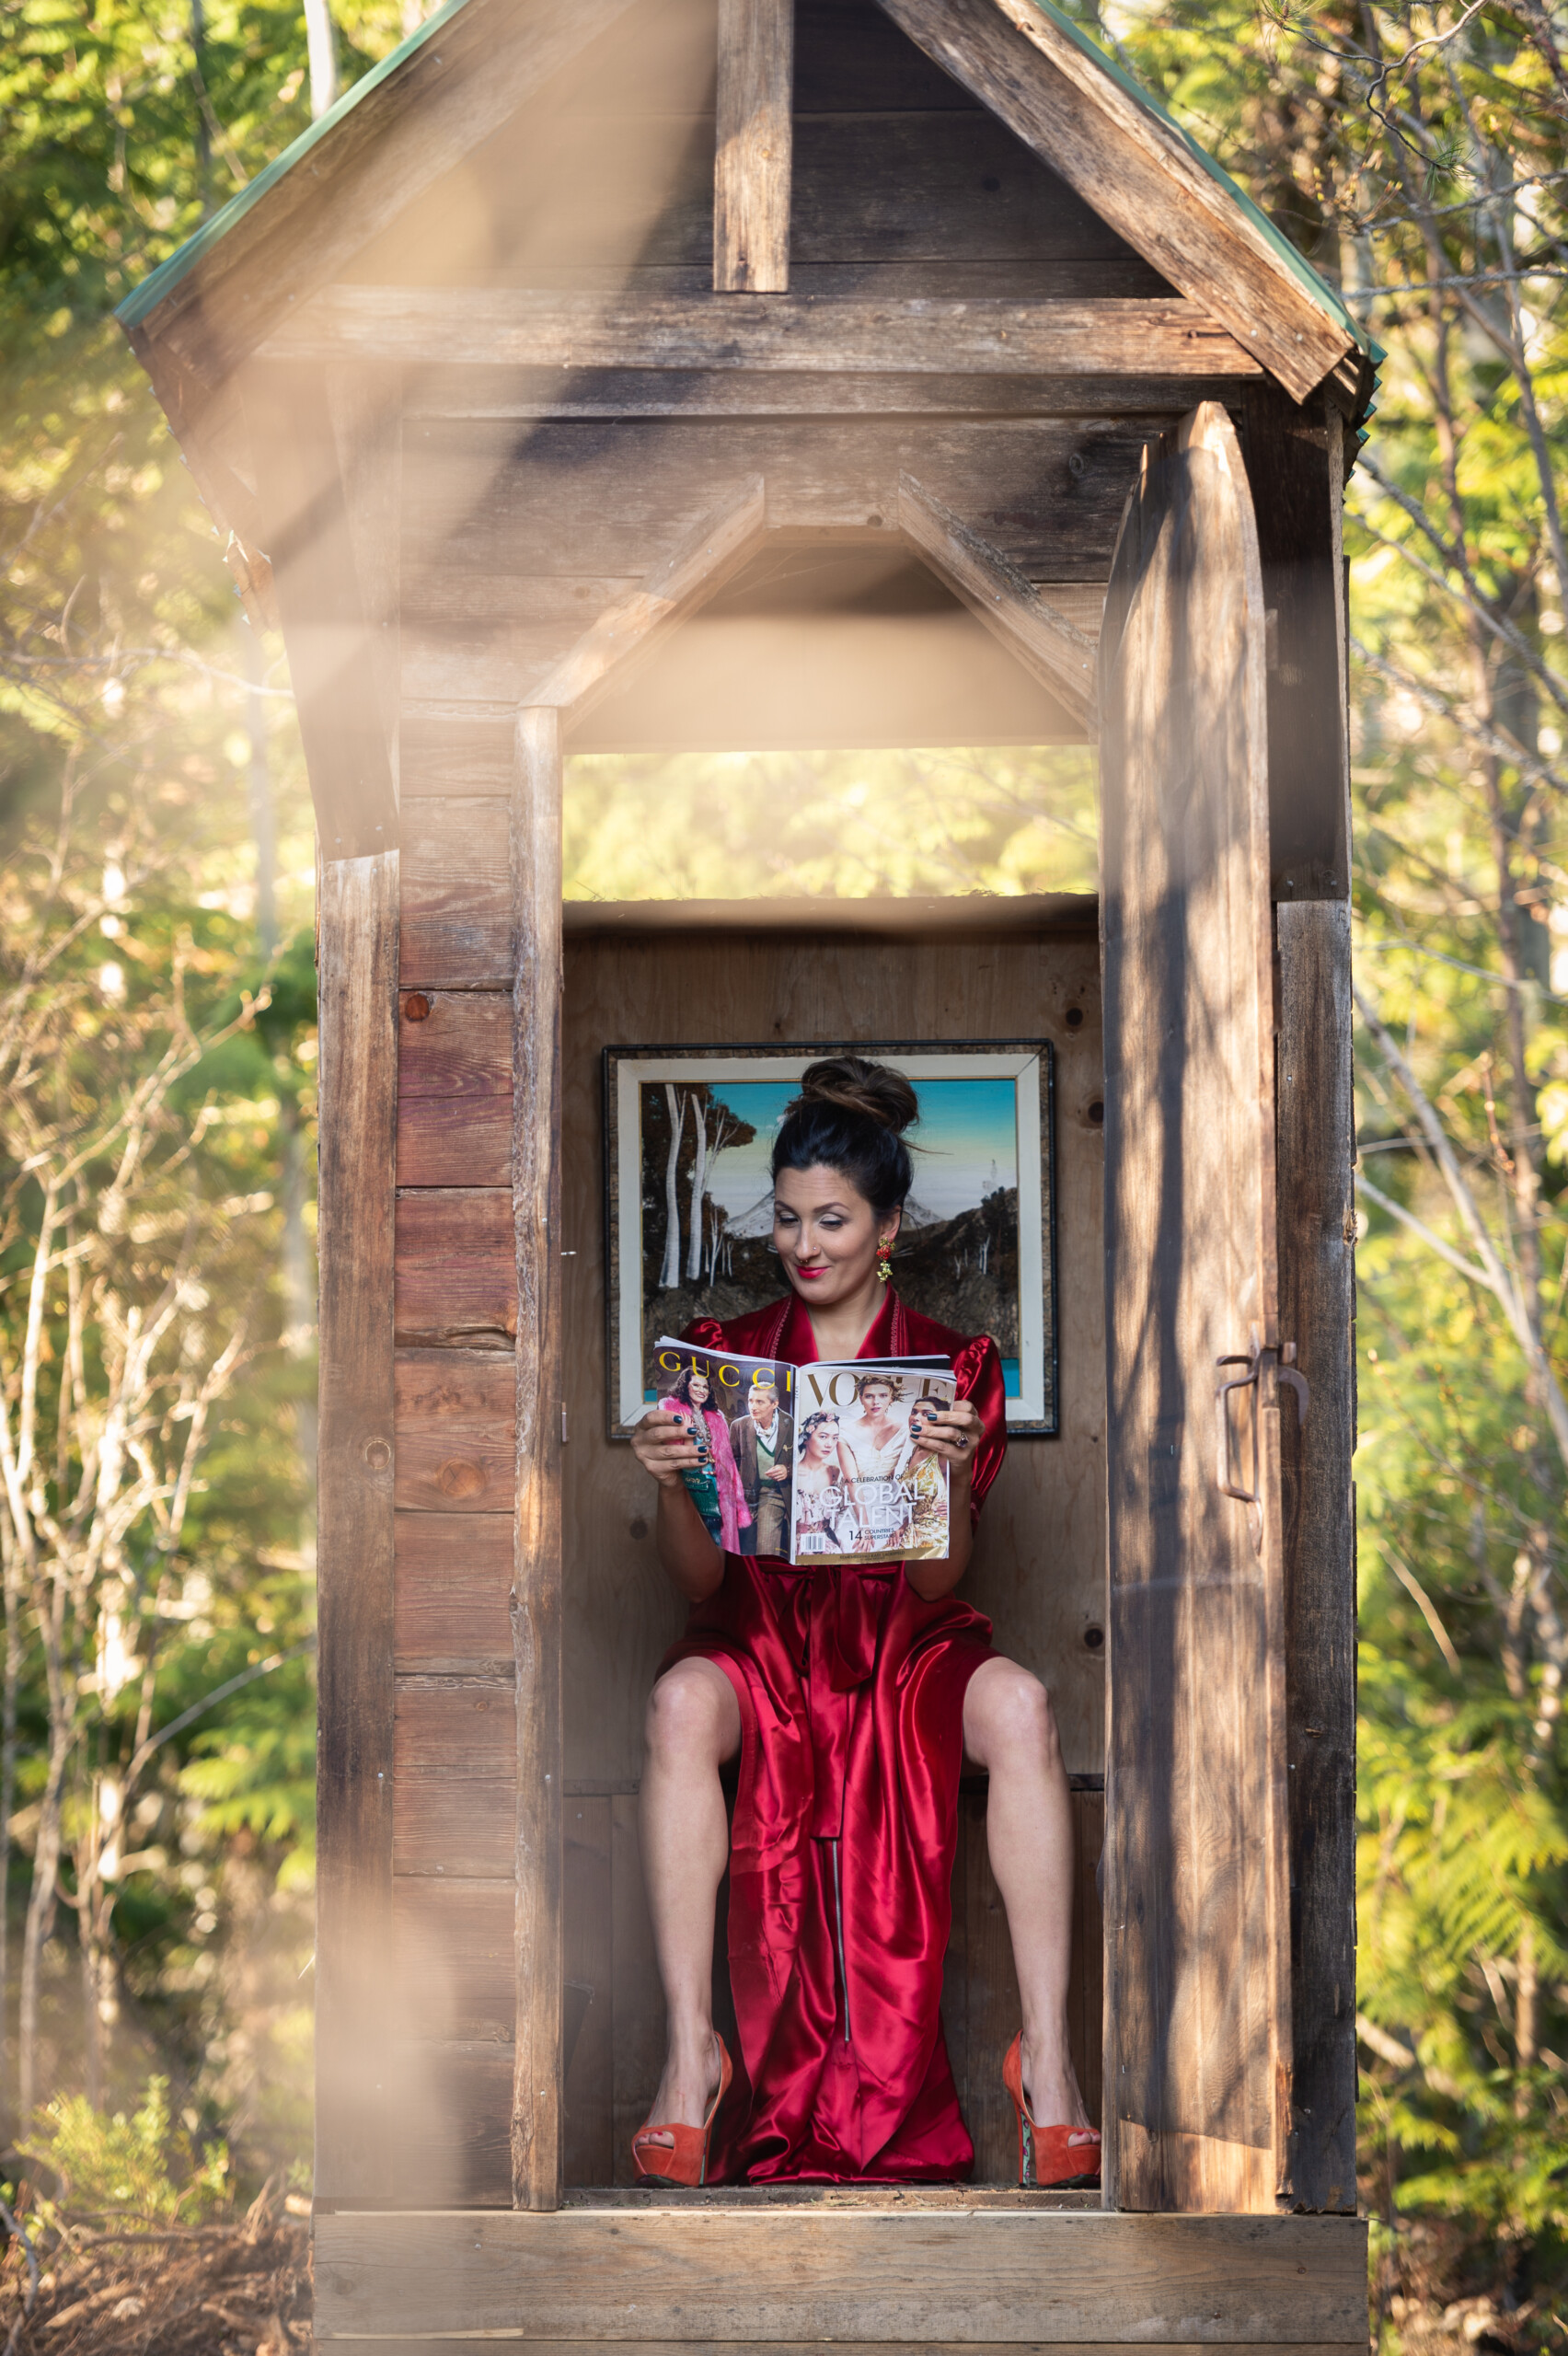 A fancy lady in an outhouse.